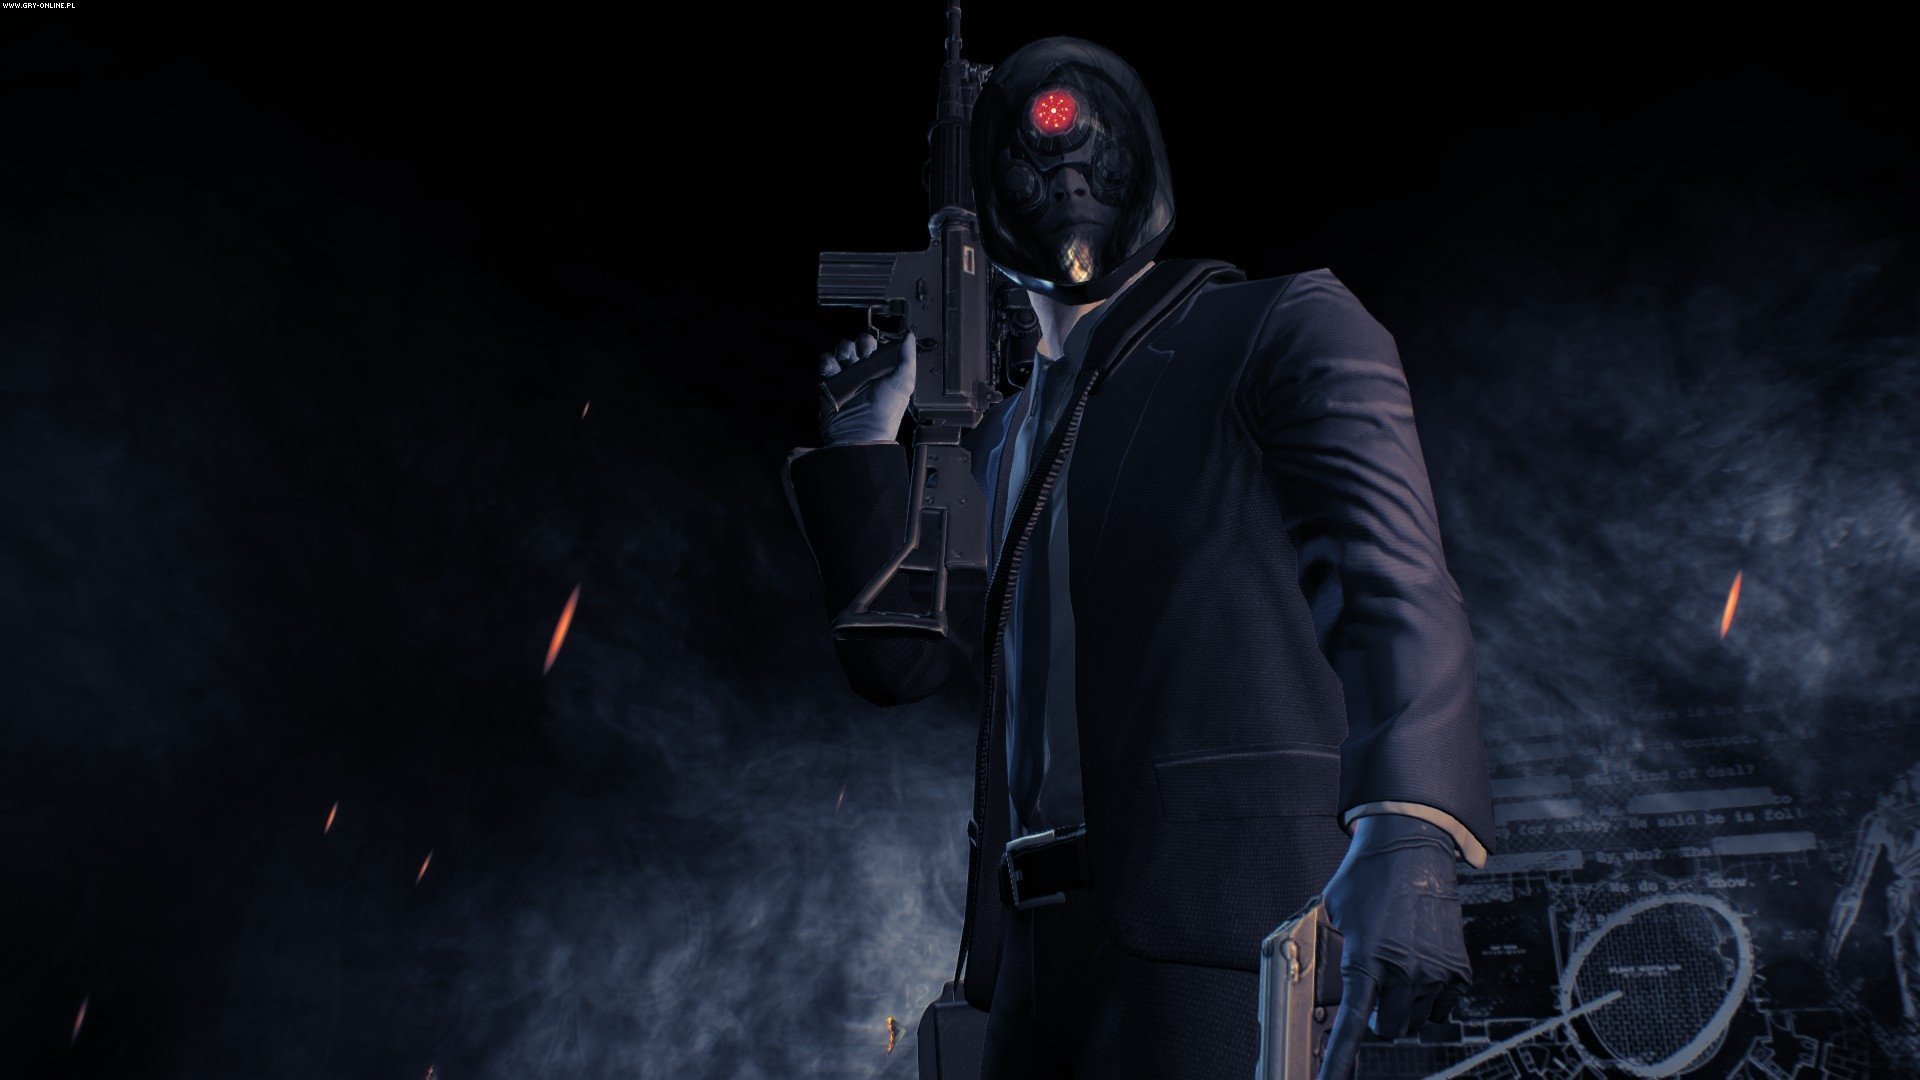 Payday 2 Wallpapers Hd For Desktop Backgrounds